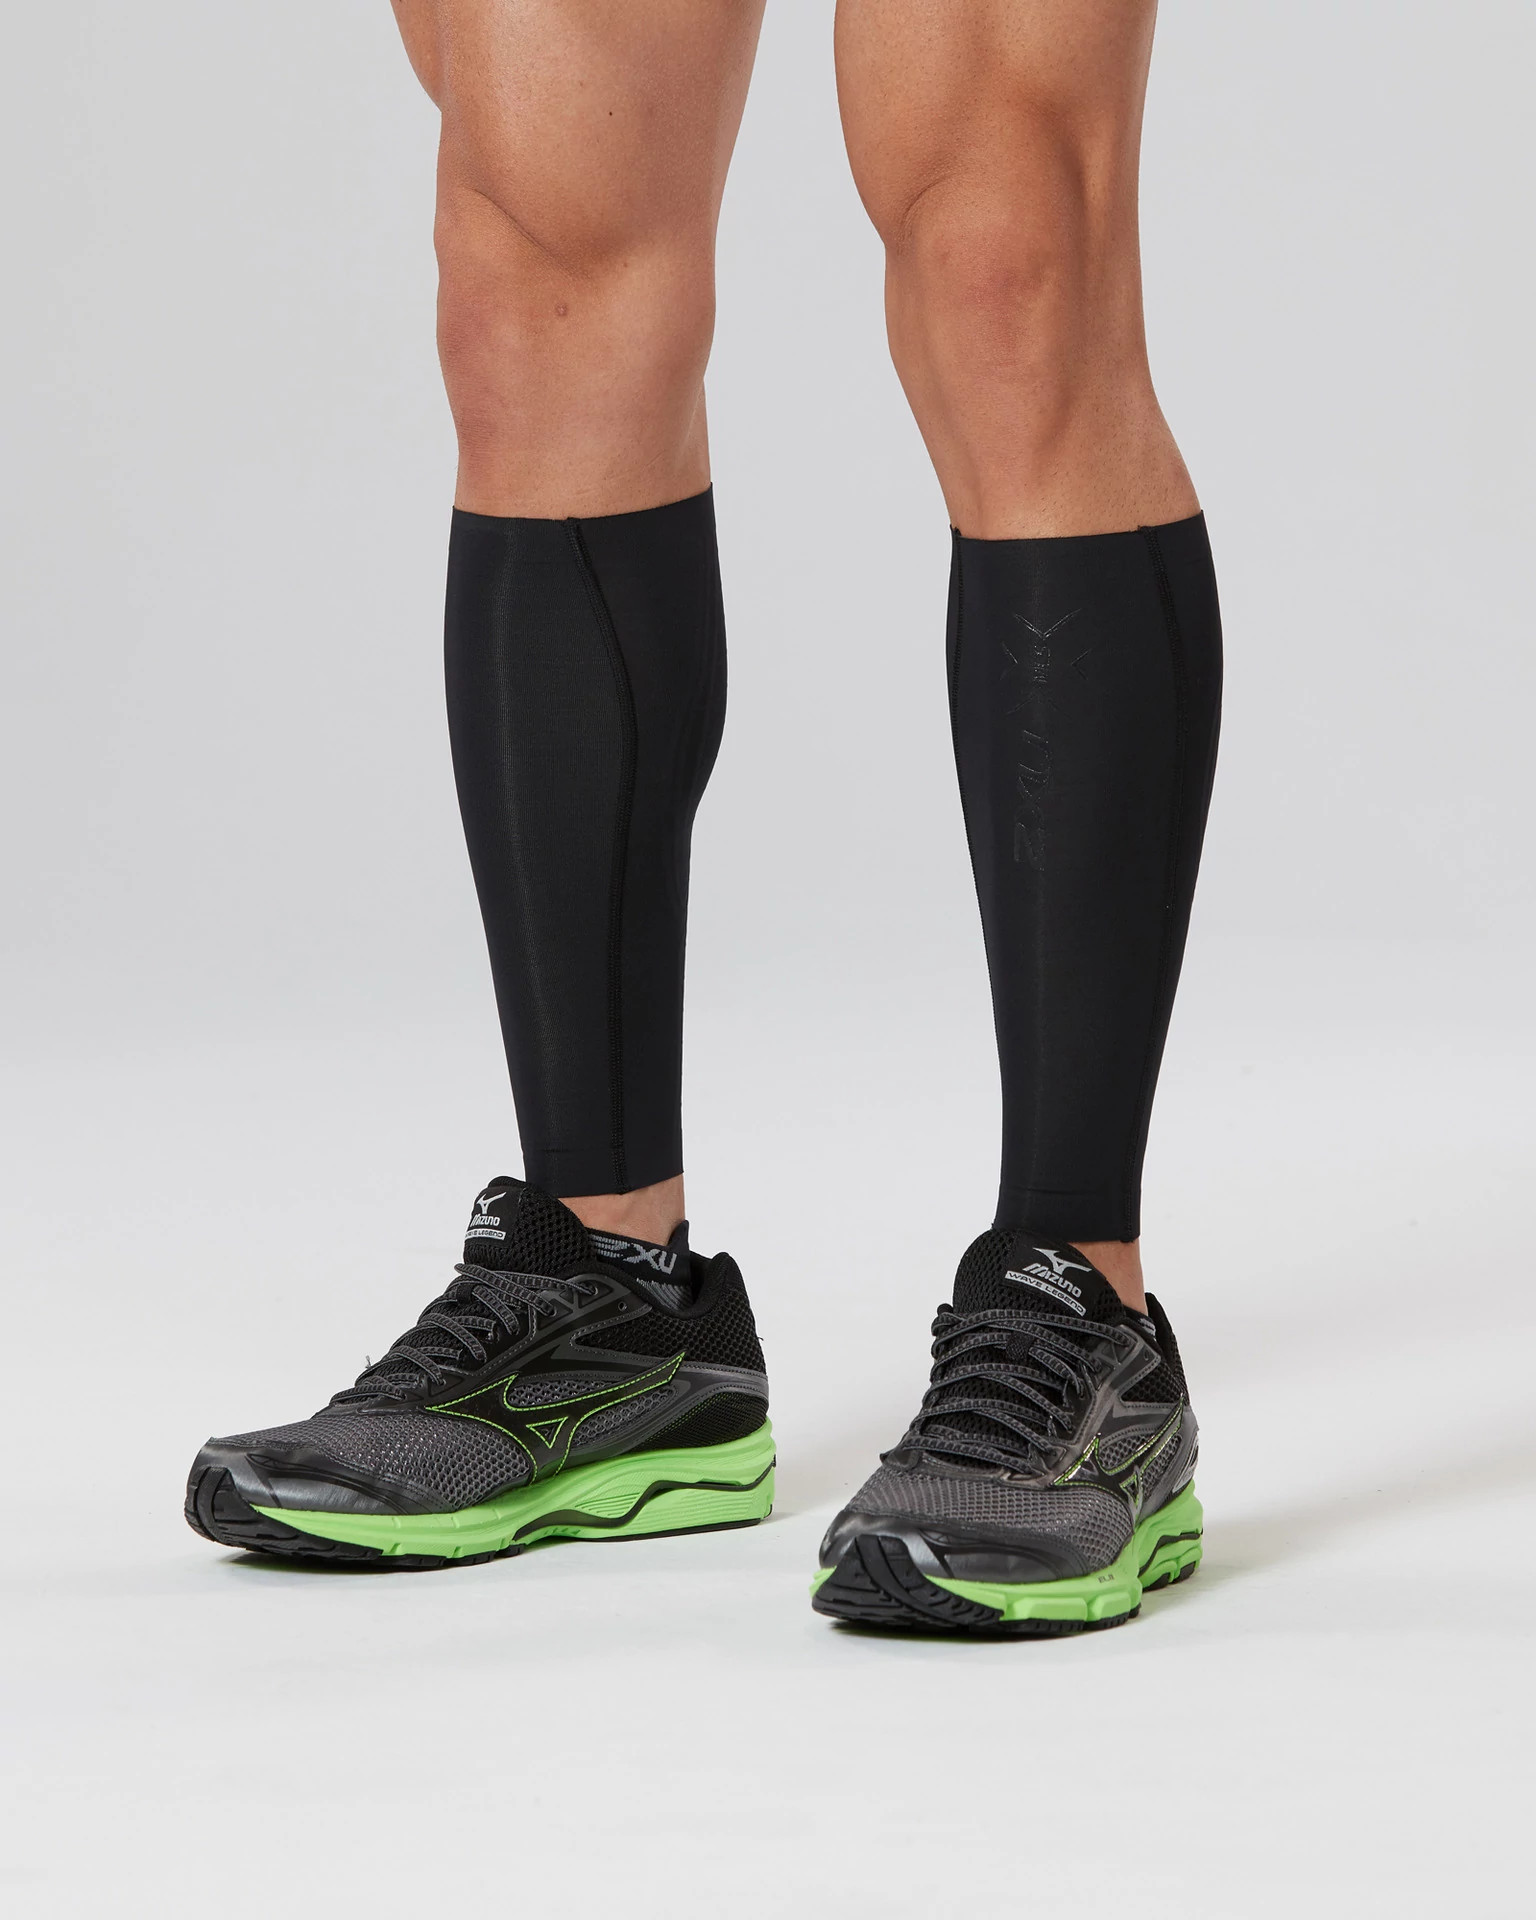 Elite SVR Compression® Recovery Calf Sleeves